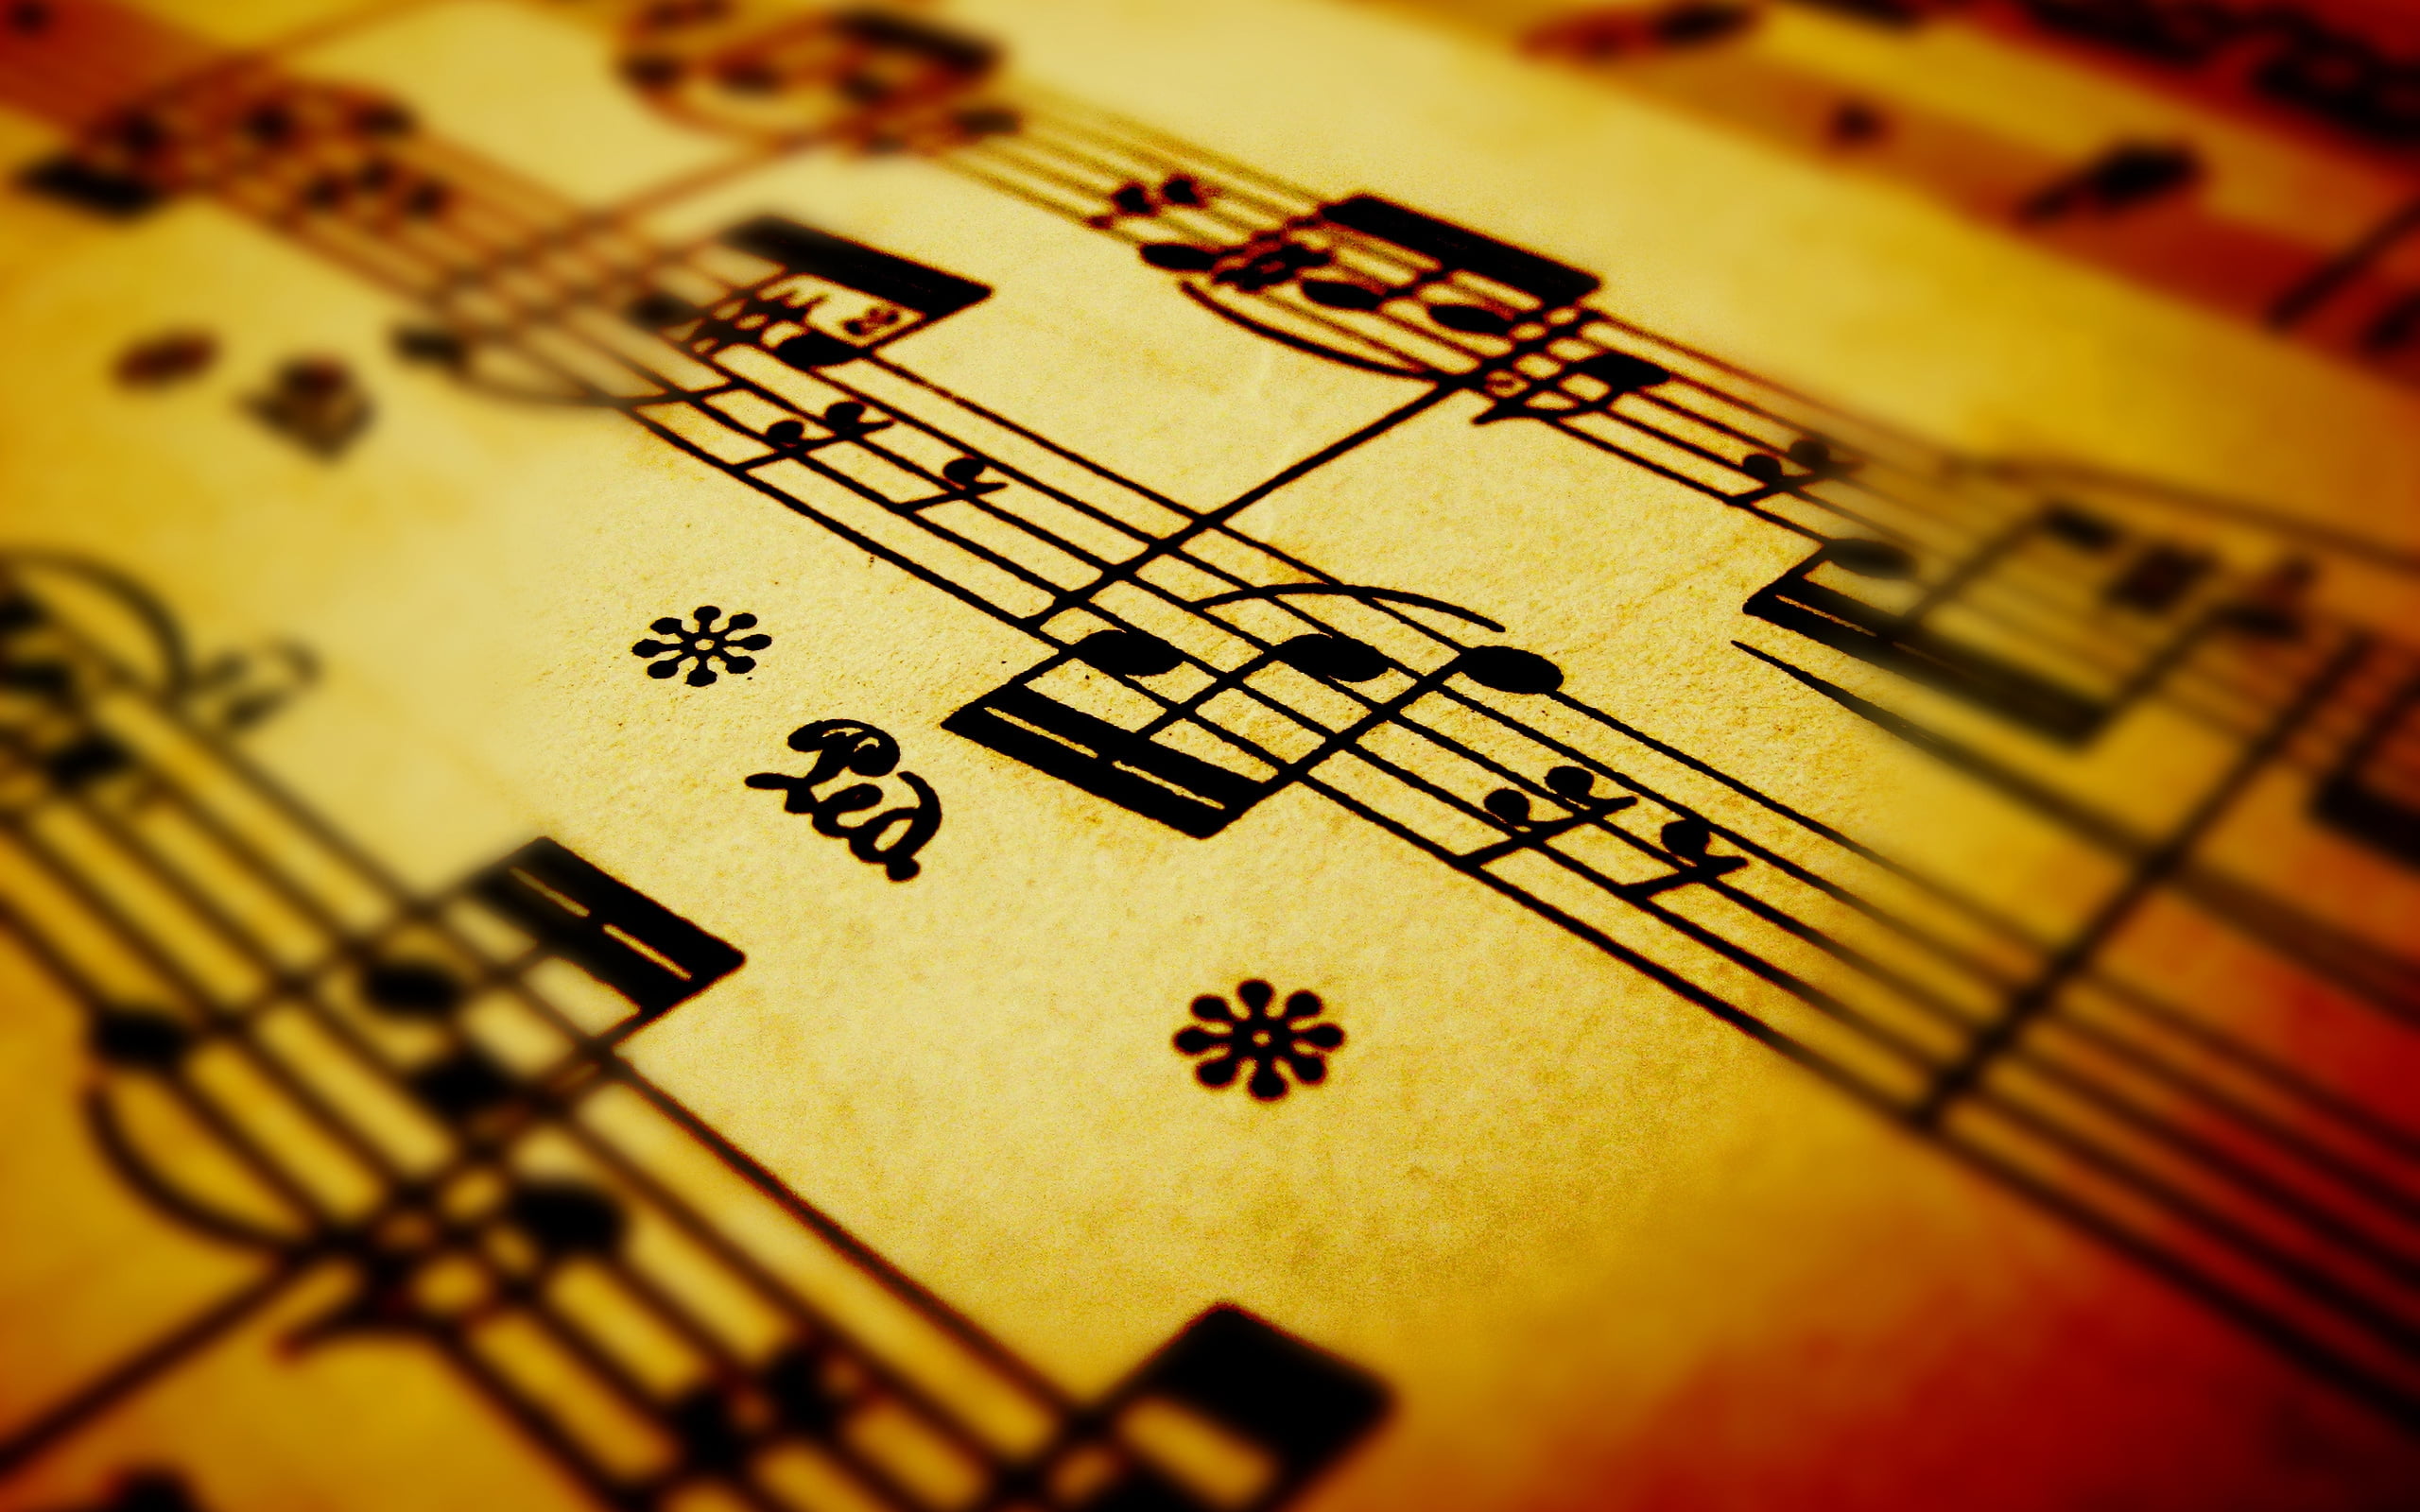 shallow focus photography of musical note